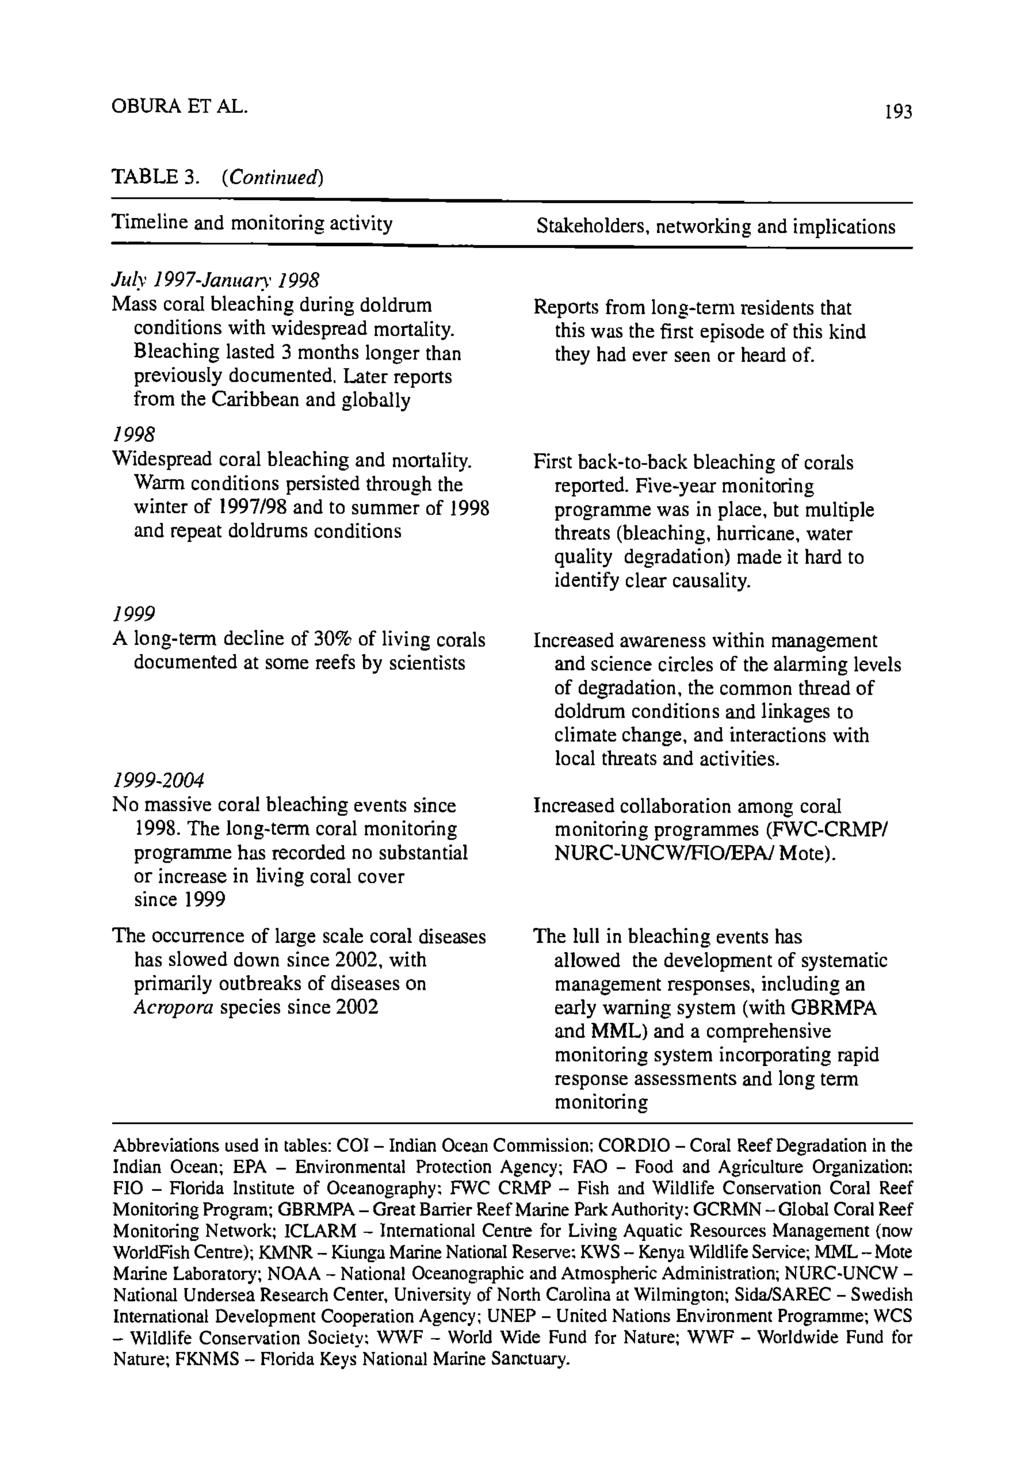 www.ebook777.com OBURA ET AL. 193 TABLE 3. (Continued) Timeline and monitoring actmty July 1997-Jam arv 1998 Mass coral bleaching during doldrum conditions with widespread mortality.